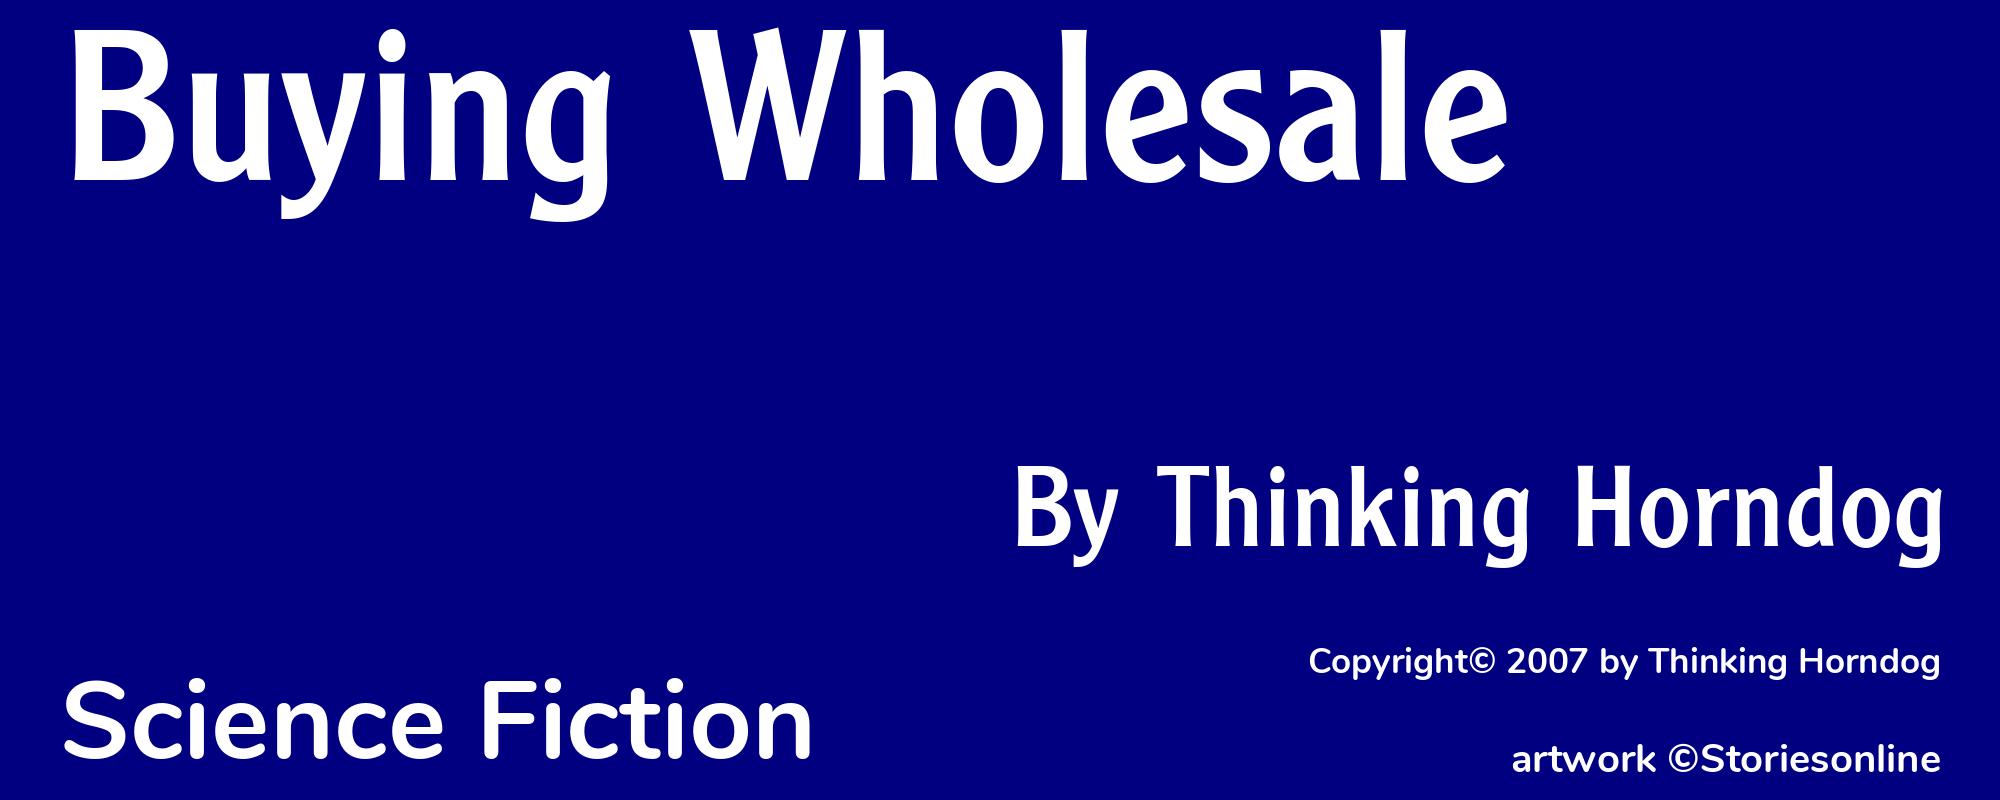 Buying Wholesale - Cover